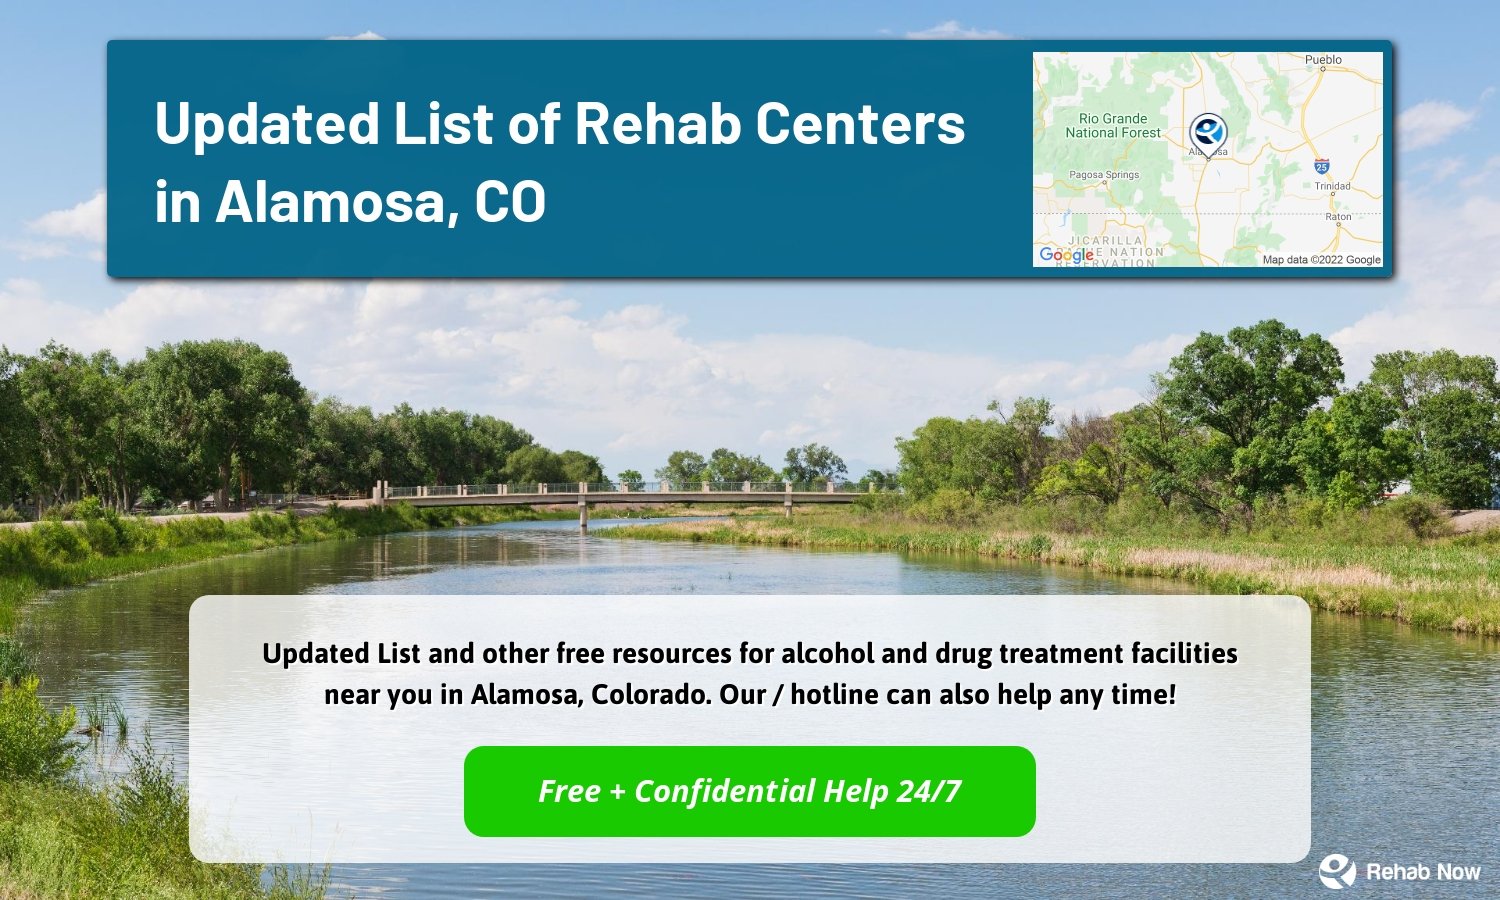  Updated List and other free resources for alcohol and drug treatment facilities near you in Alamosa, Colorado. Our / hotline can also help any time!